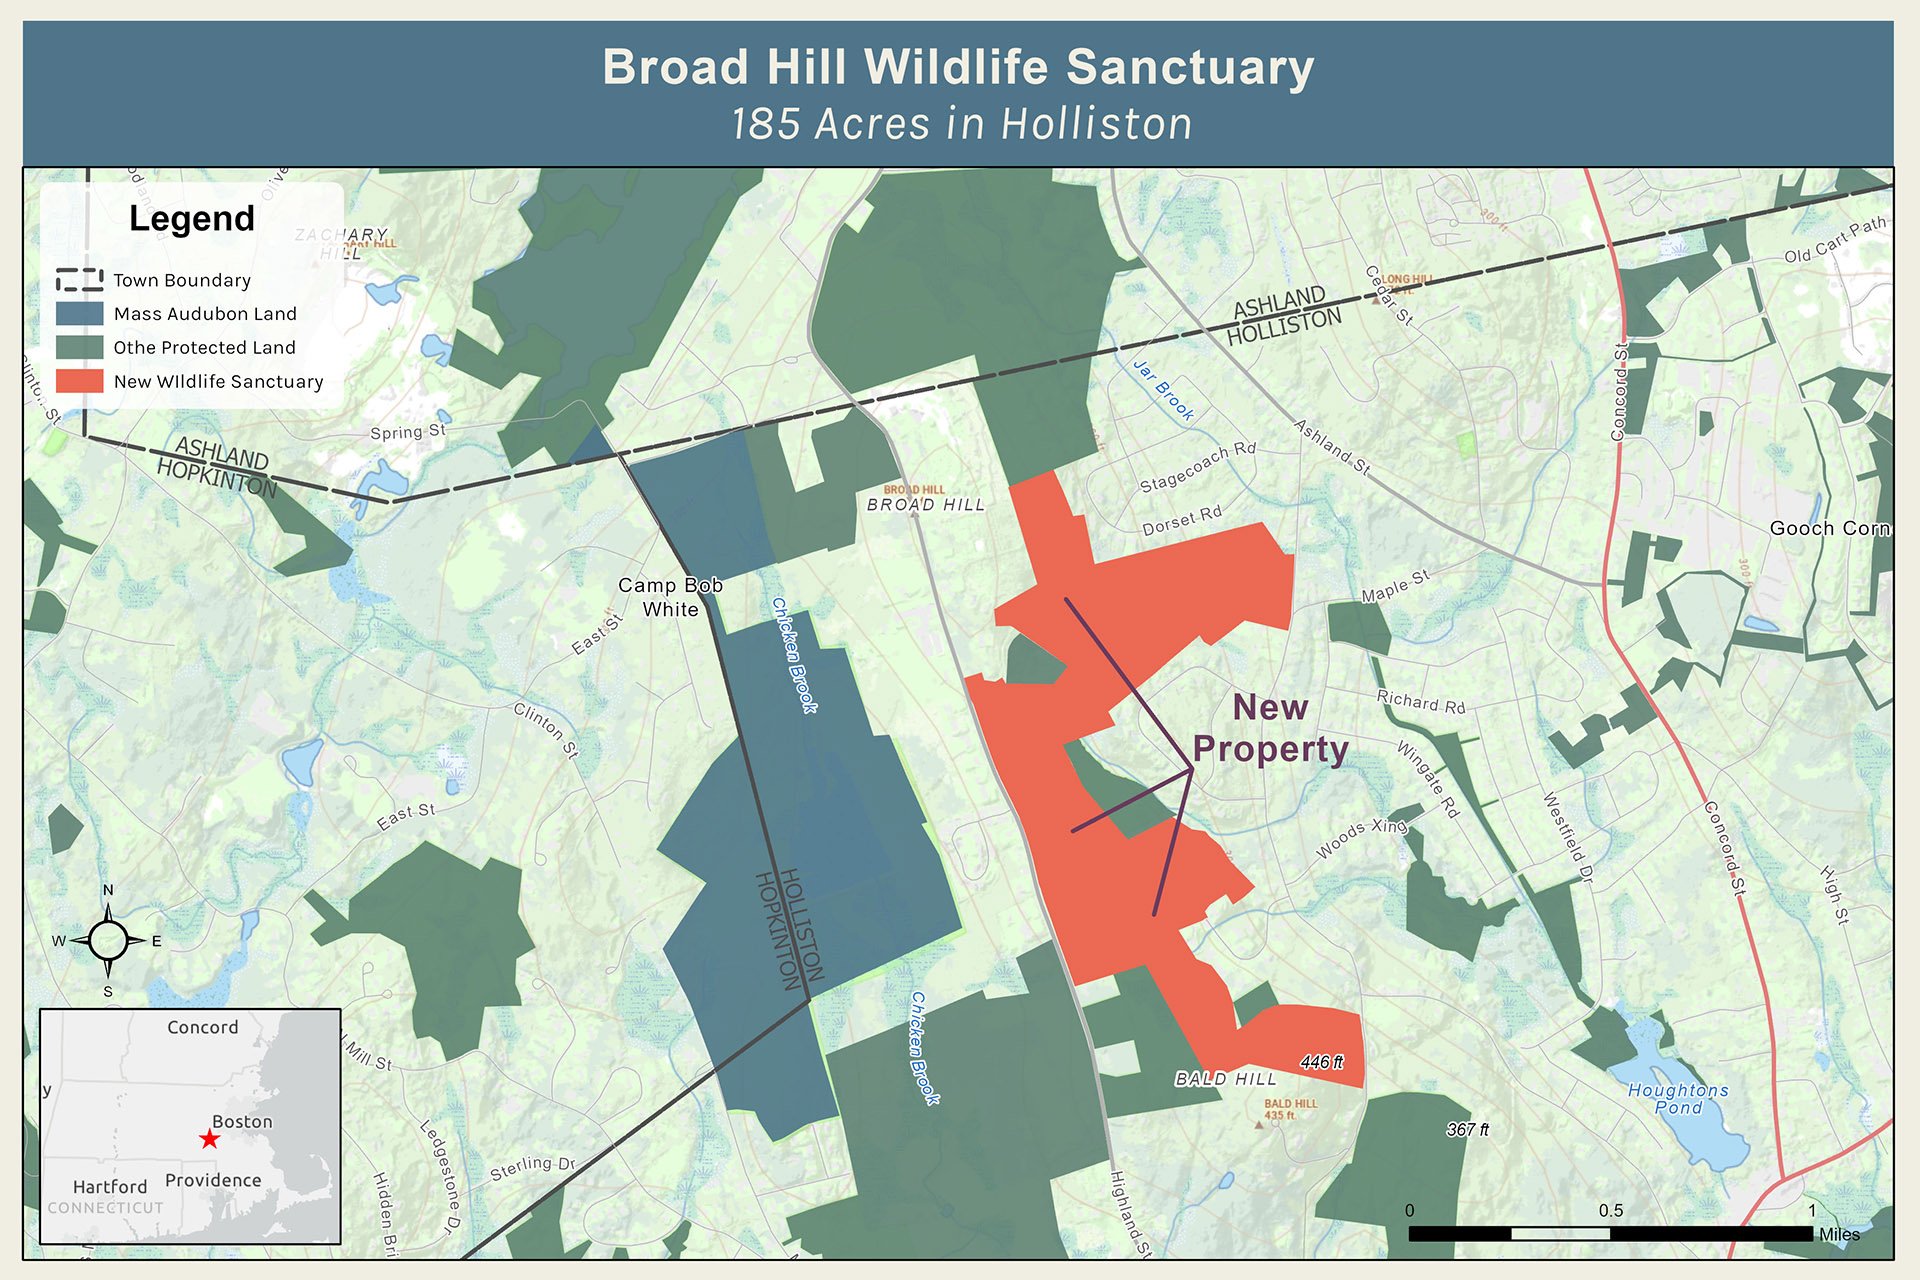 Area map of the planned Broad Hill Wildlife Sanctuary